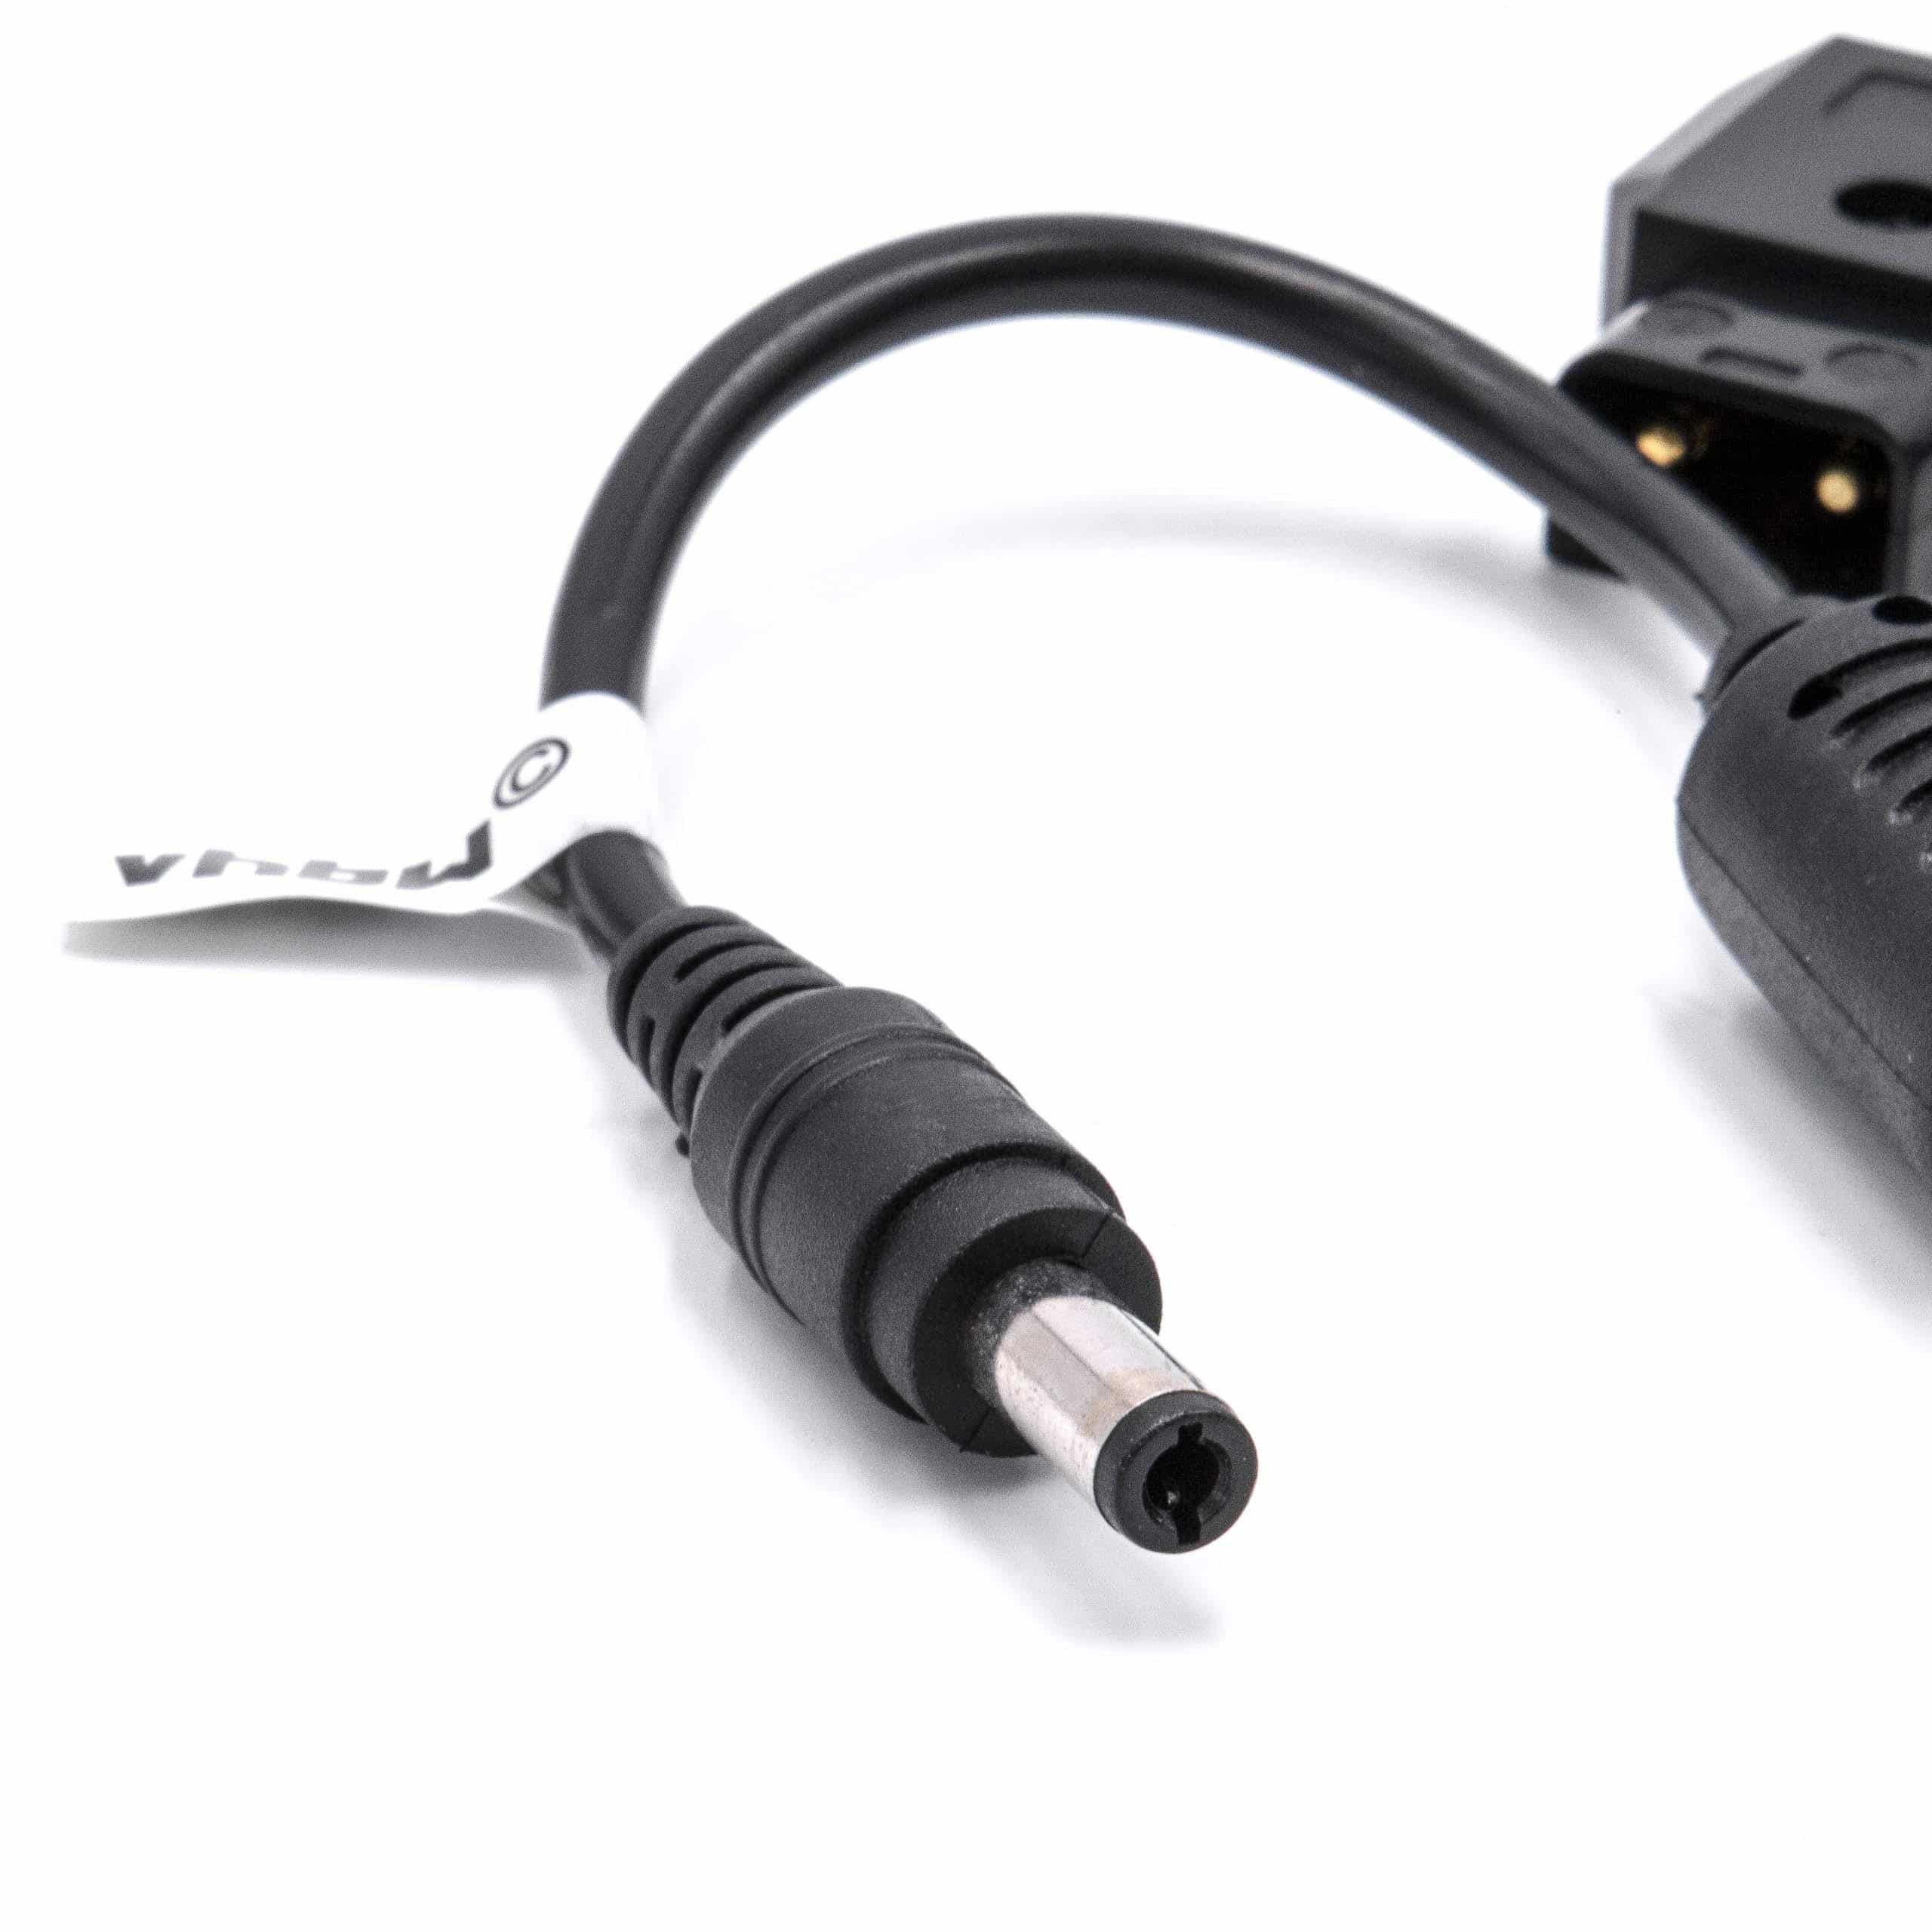 Adapter Cable D-Tap (male) to LED Power Supply suitable for Anton Bauer D-Tap, Dionic Camera - 1 m Black